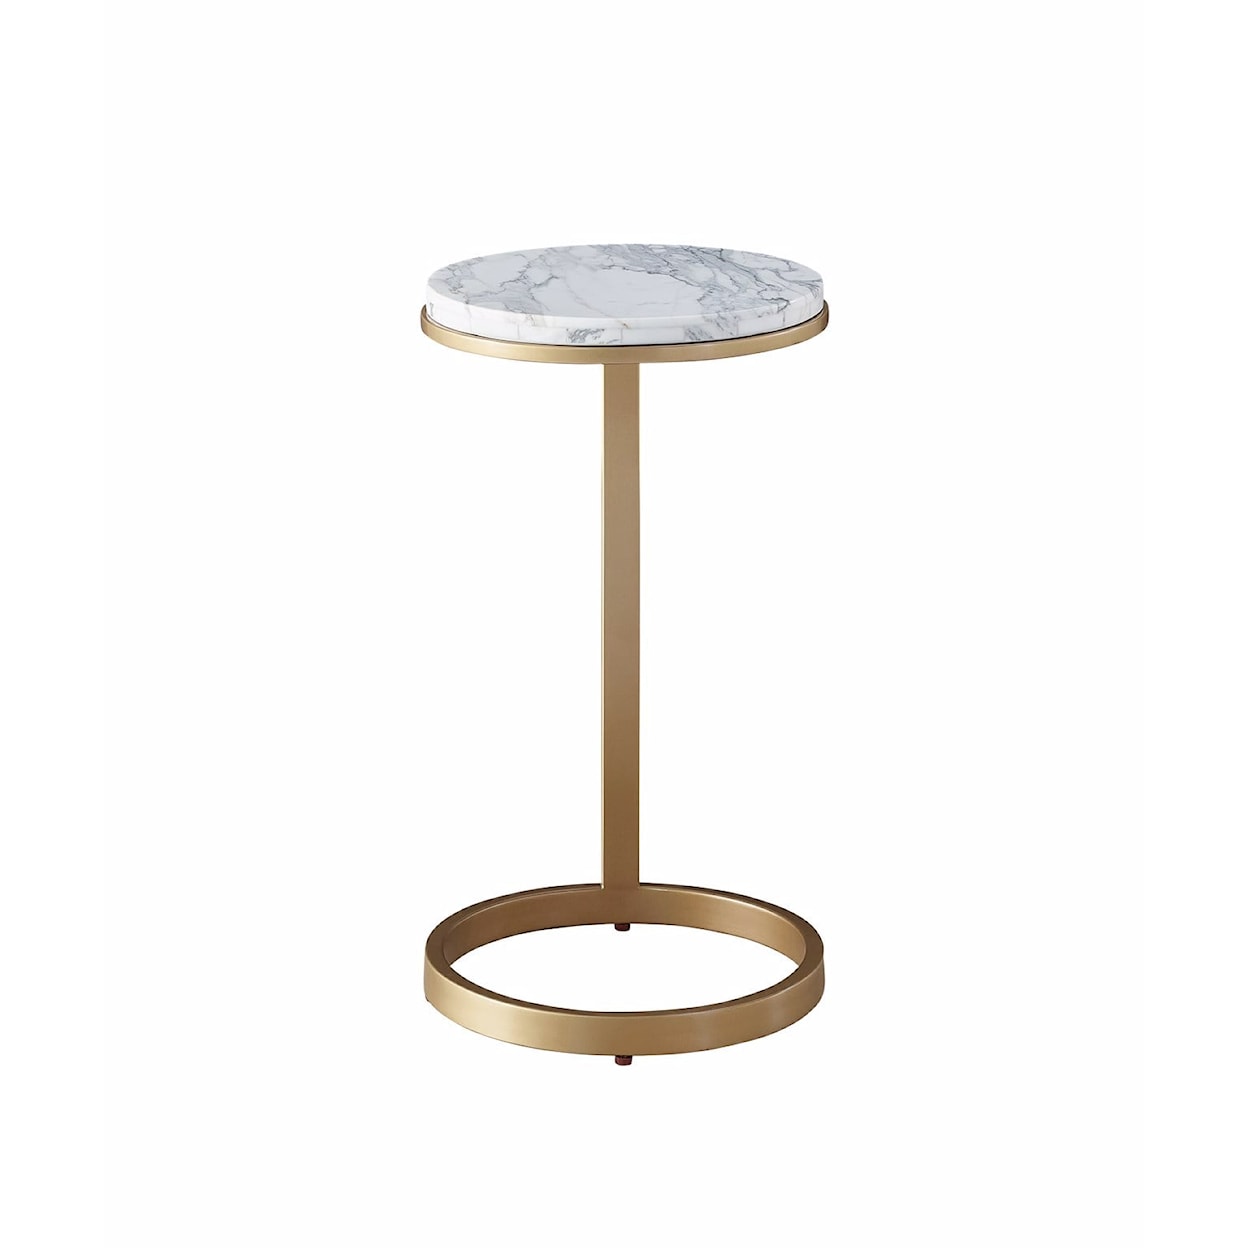 Universal Tranquility - Miranda Kerr Home Tranquility Side Table